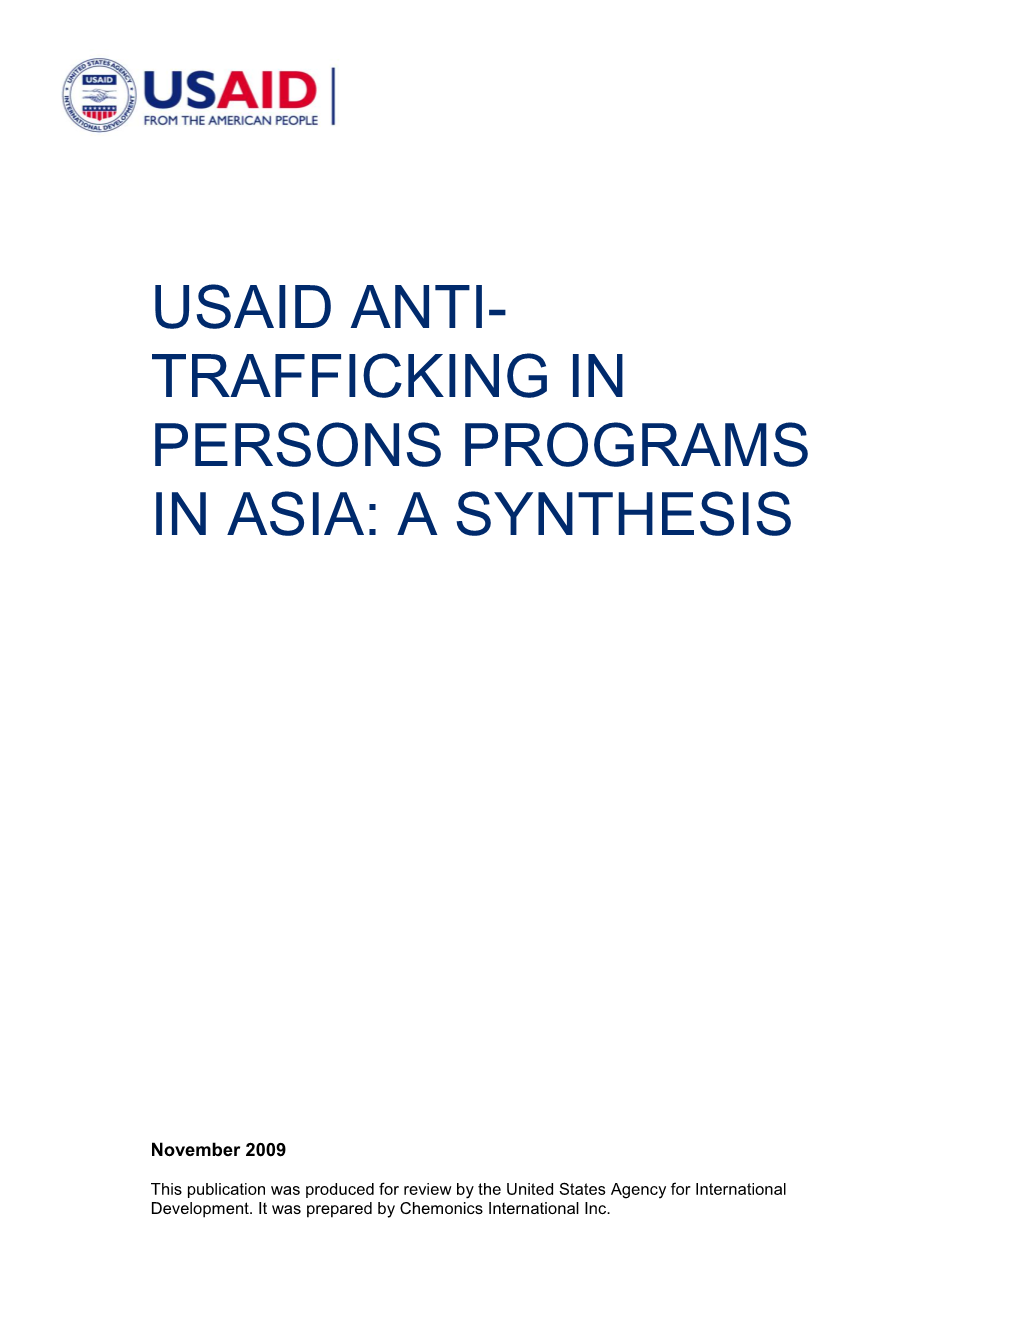 USAID Anti-Trafficking in Persons Program in Asia: a Synthesis